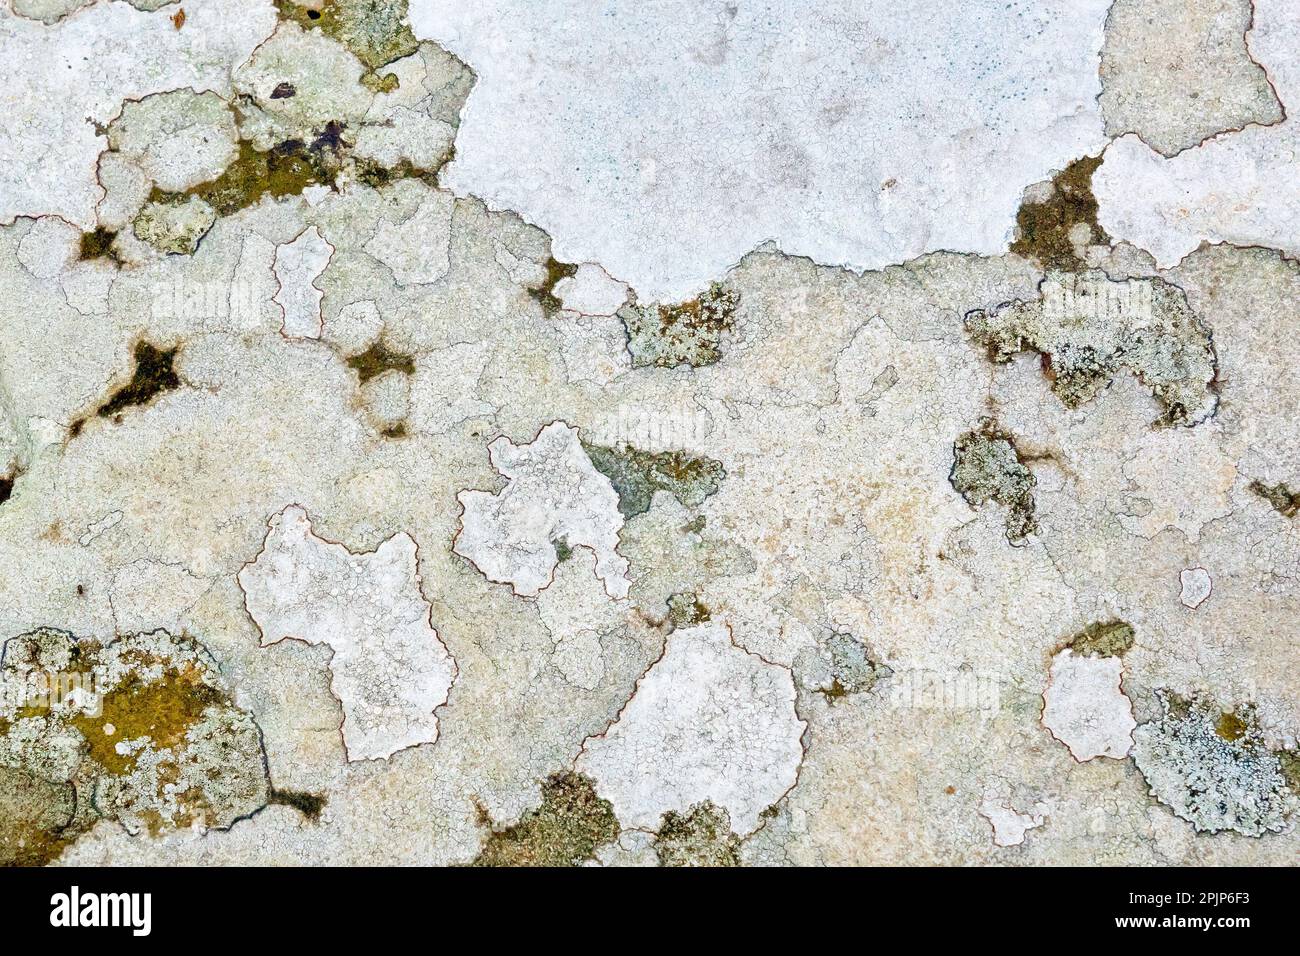 Close up showing several distinct growths of a crustose white lichen overlapping and overgrowing each other, one or more of the many Lecanora species. Stock Photo